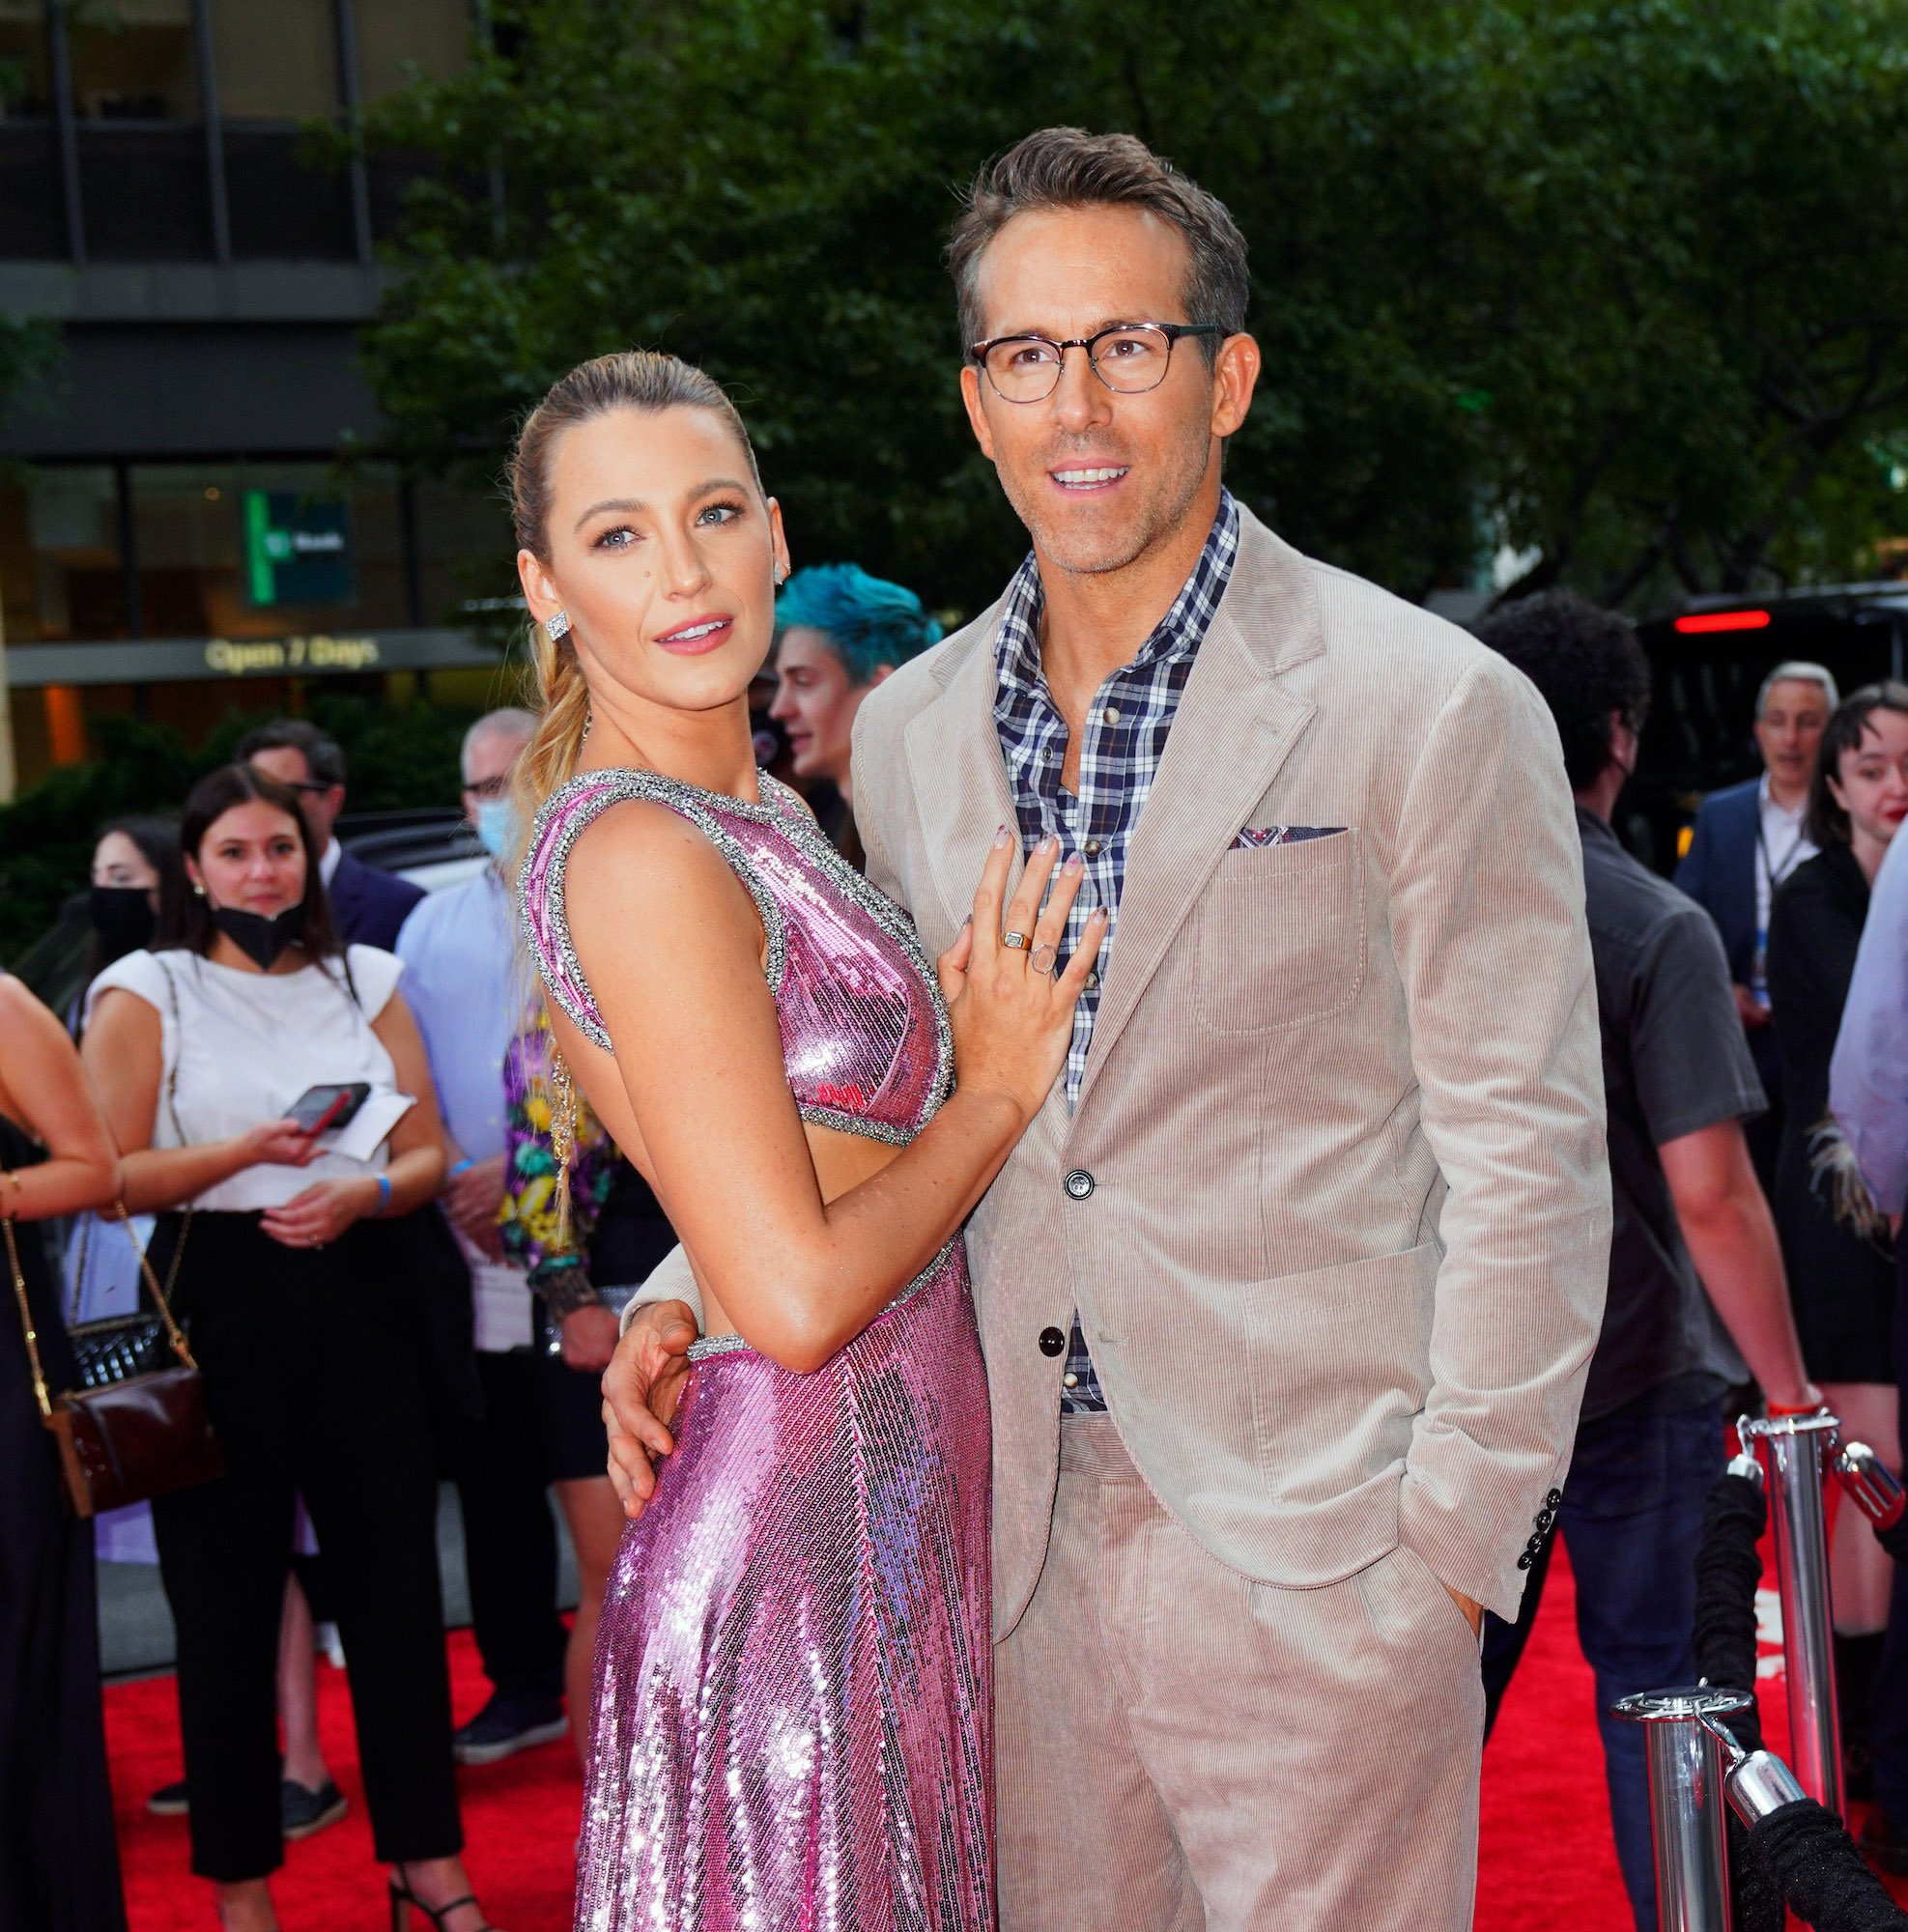 Blake Lively and Ryan Reynolds at the "Free Guy" premiere in NYC